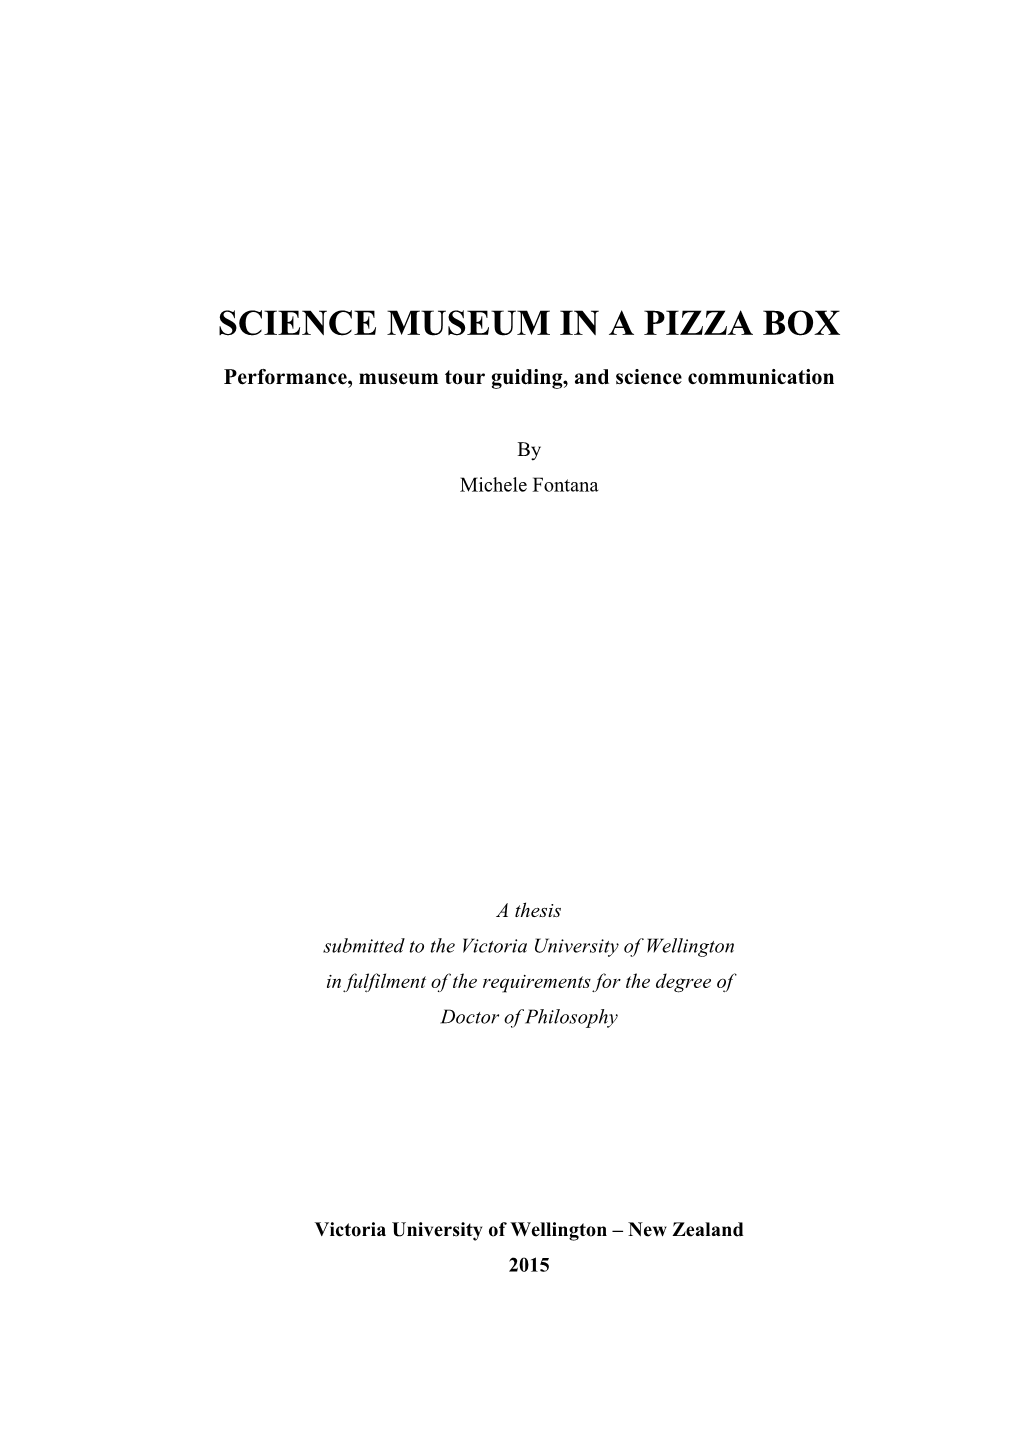 Science Museum in a Pizza Box